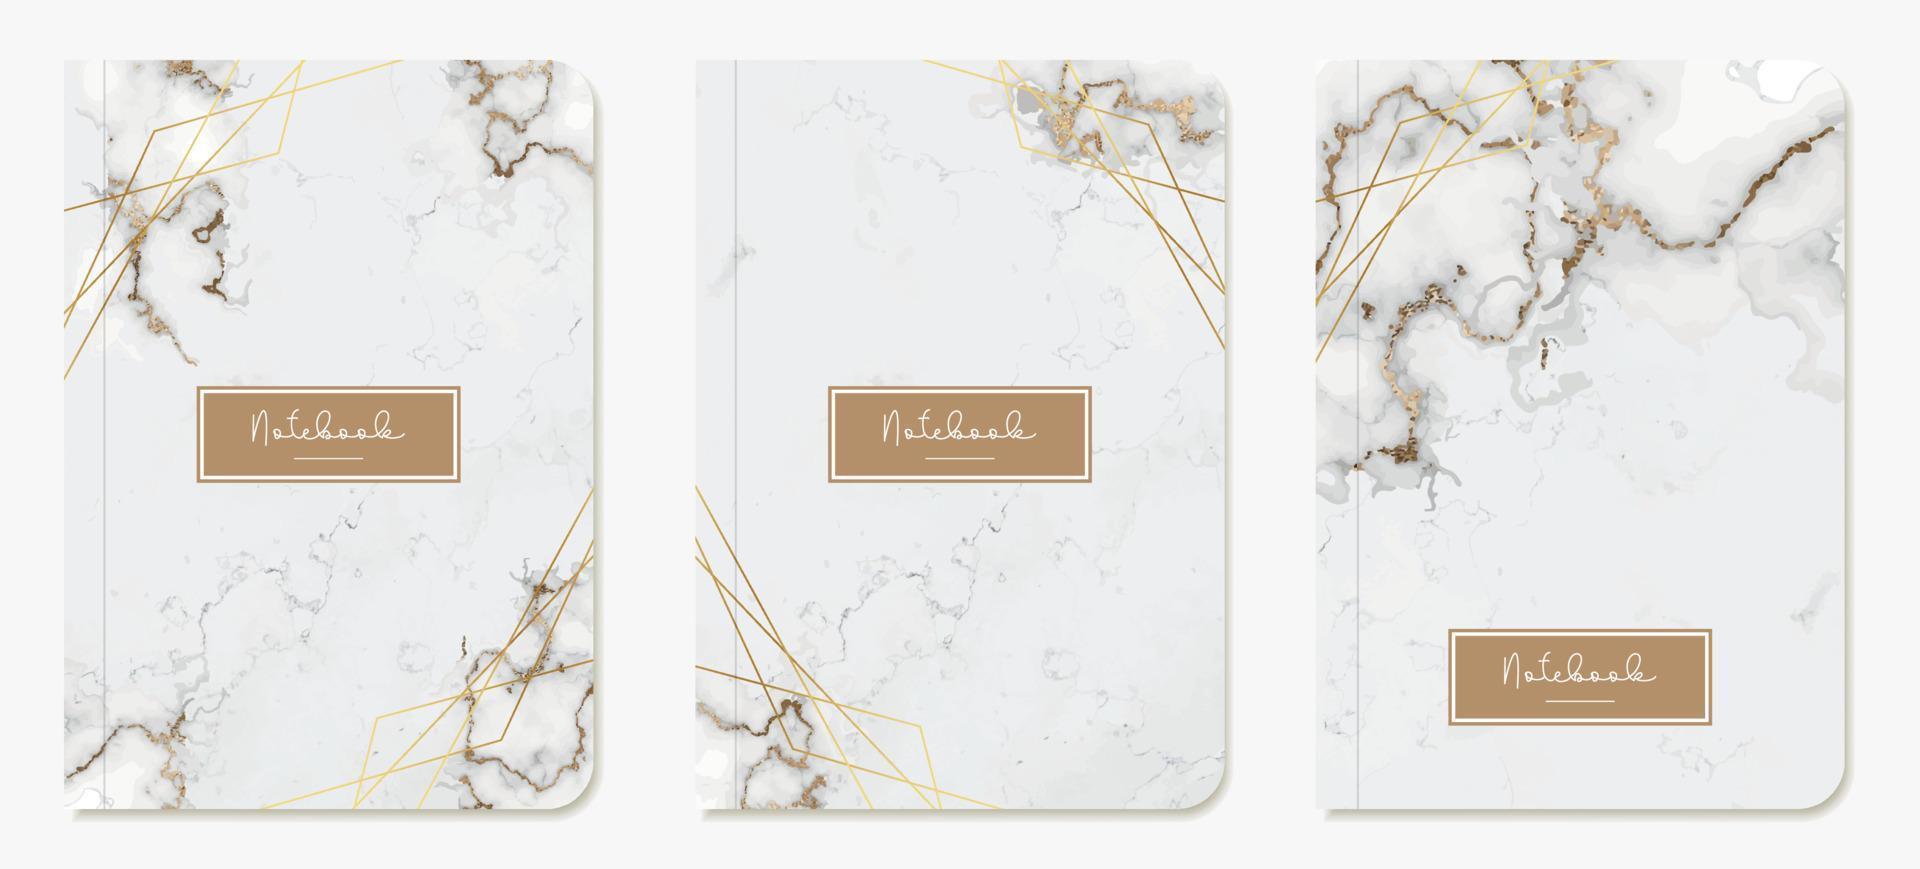 Layouts of notepads with covers. Templates with marble stone texture, gold lines and glitter. Vector for diaries, diaries, catalogs, planners